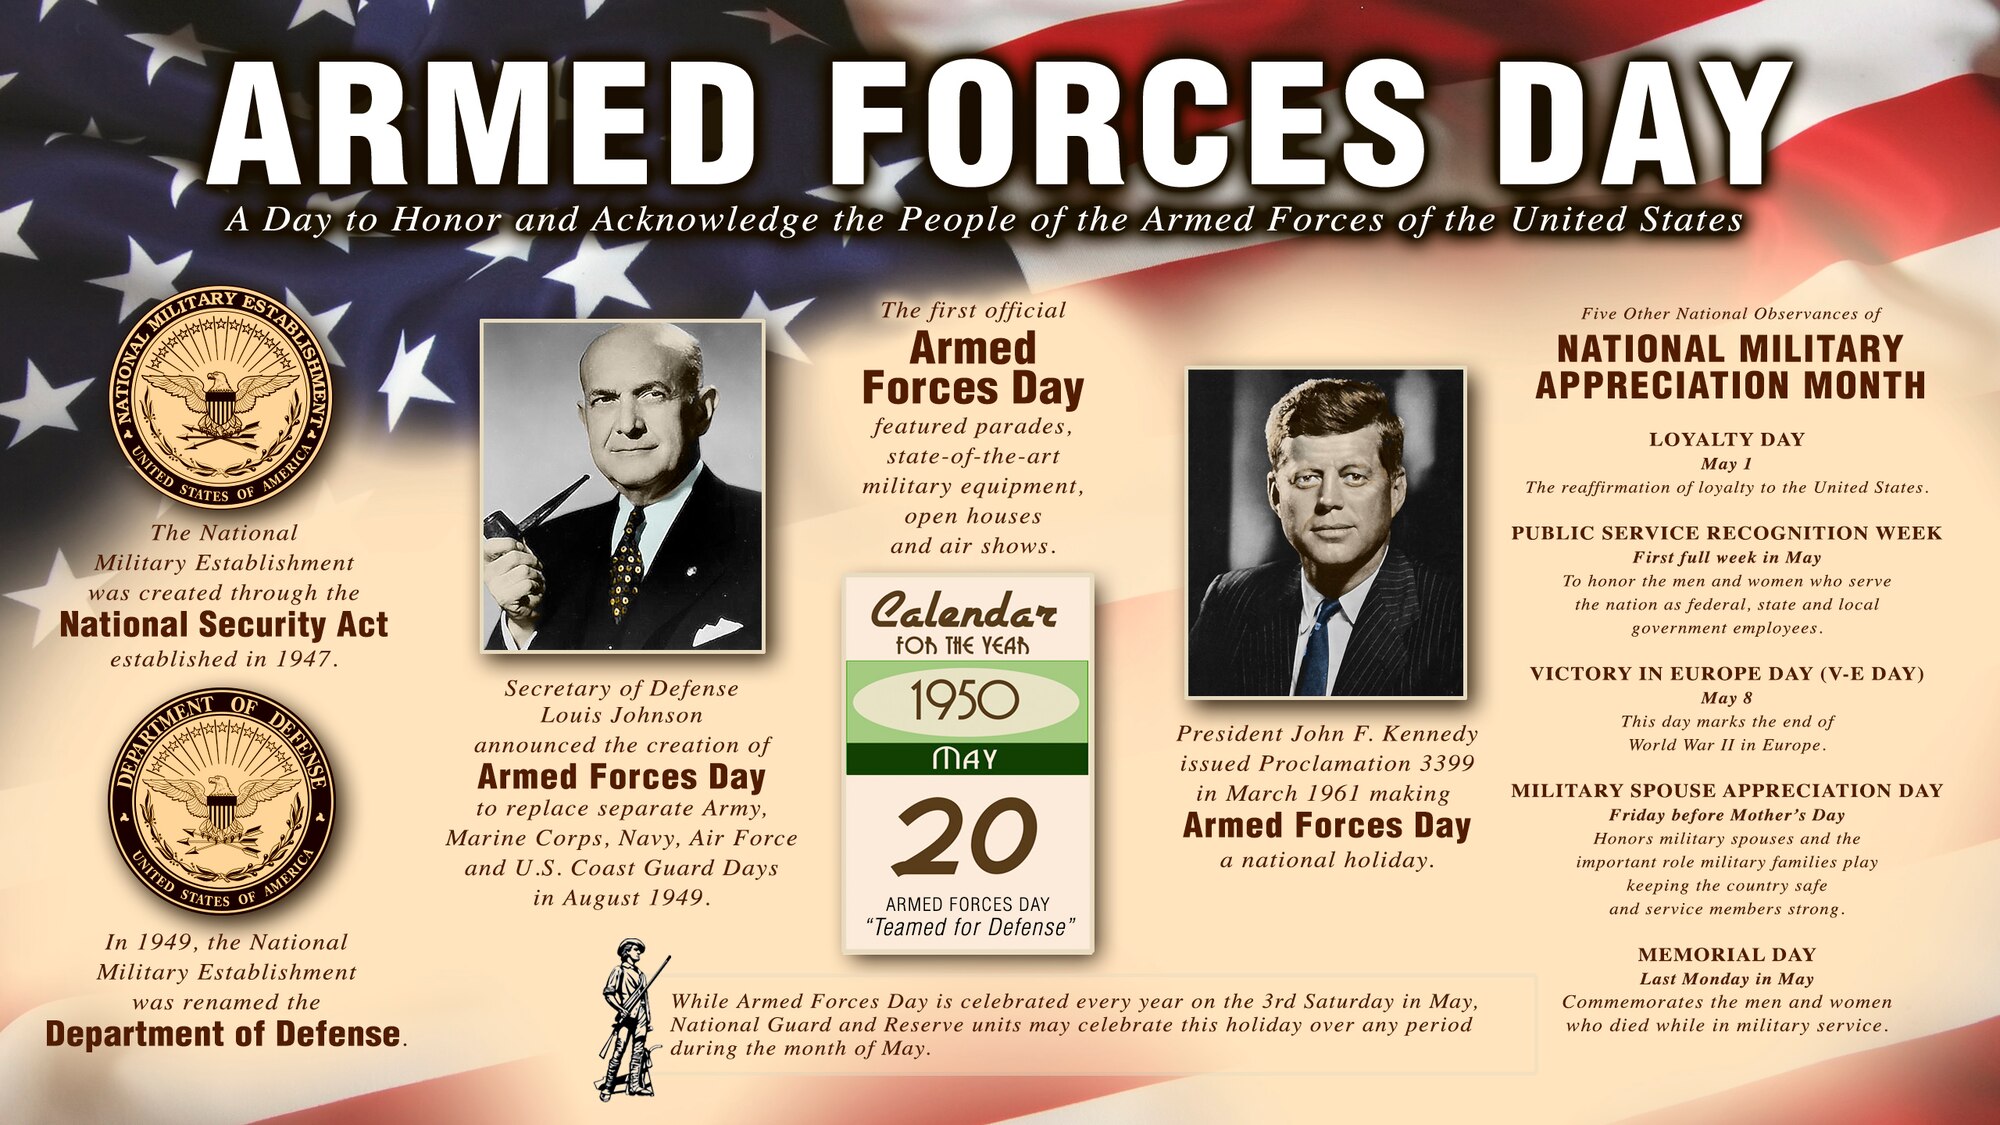 armed forces day 2021